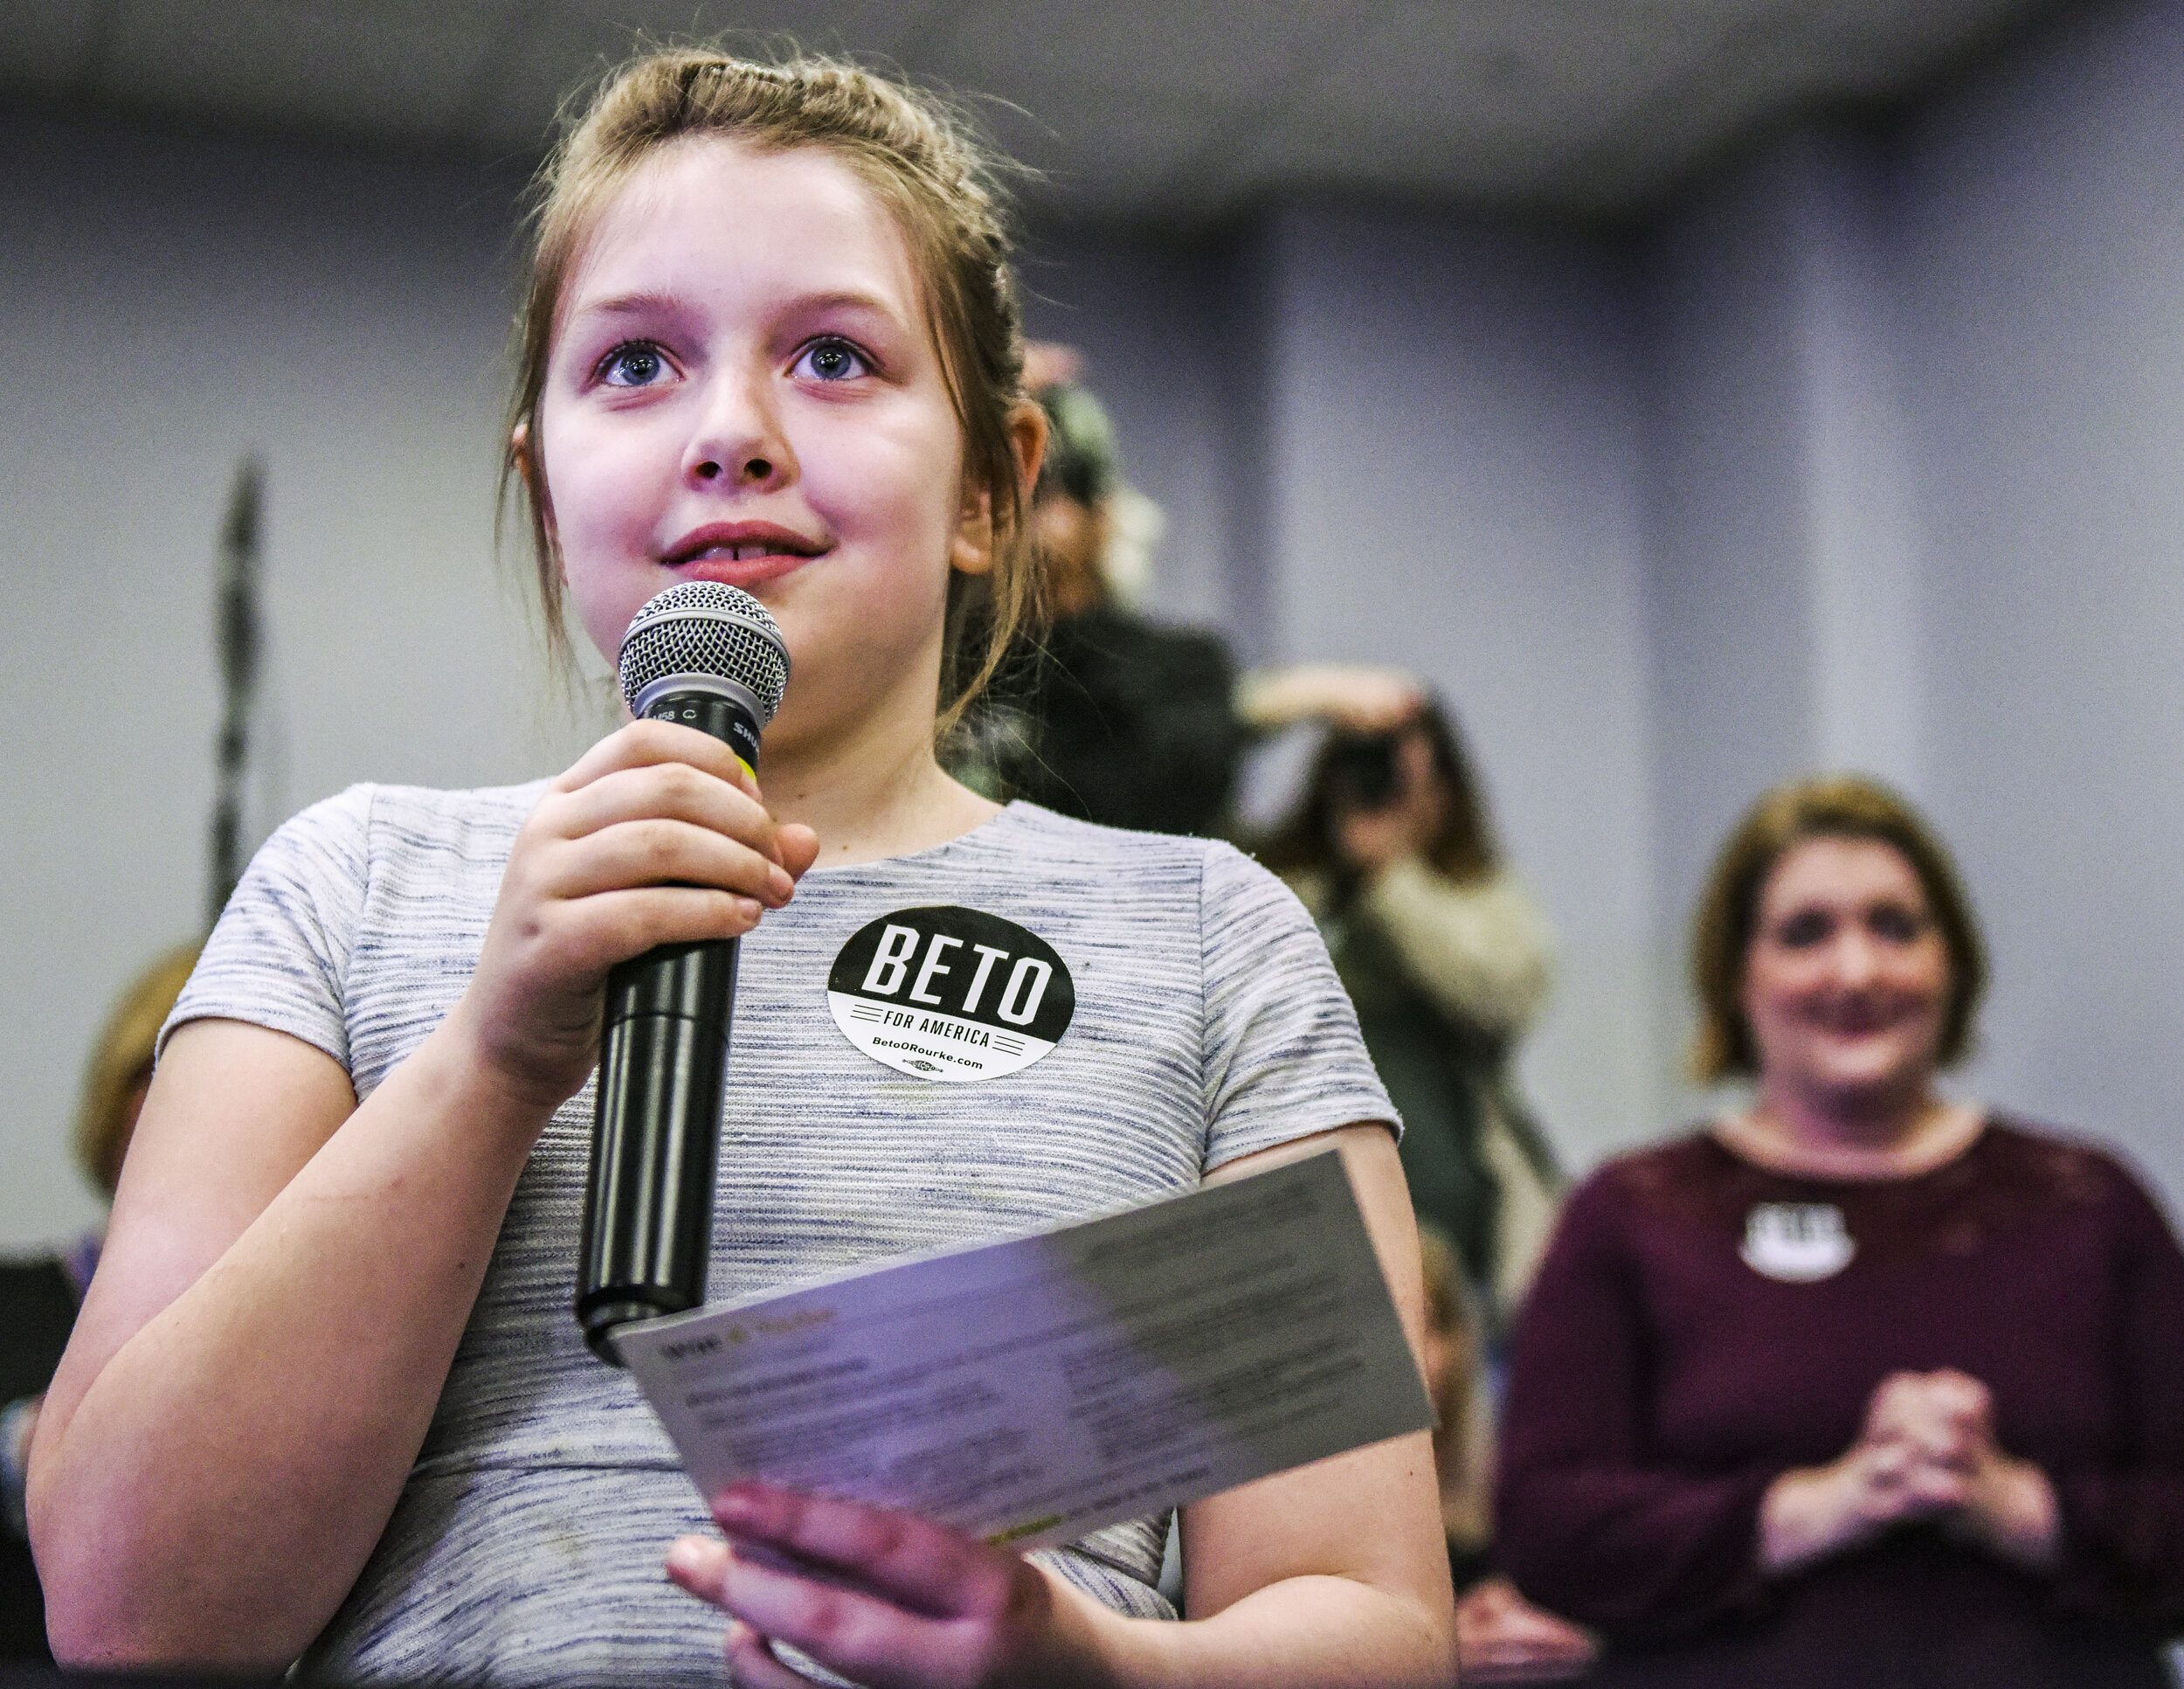  Anjuli Kranz, 9, of Davenport, asks Democratic presidential candidate and former Texas Congressman Beto O'Rourke, "I want to know if you are going to fully fund IDEA?" during a town hall meeting at River Music Experience, Monday, May 20, 2019, in Da